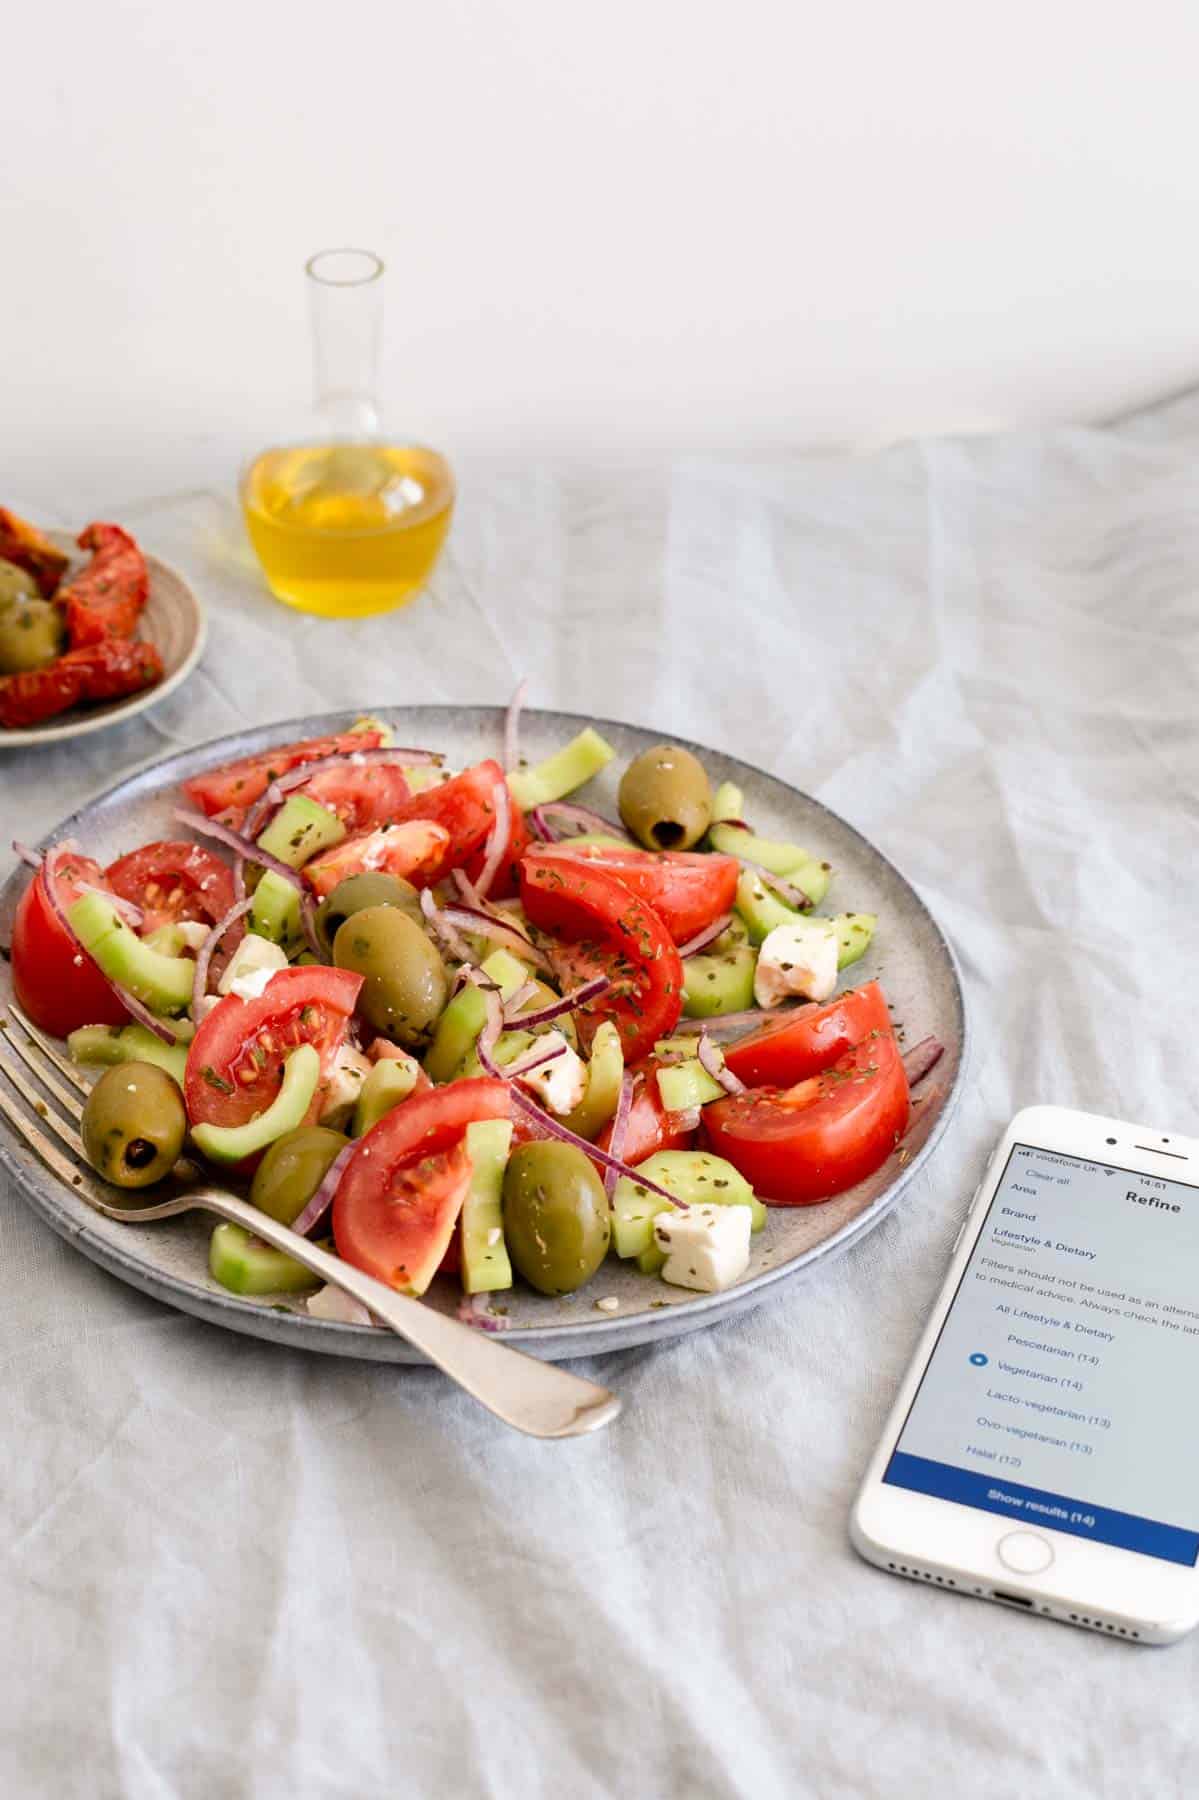 Easy Greek salad with simple ingredients. Buy your groceries with Tesco's app and try their new filtering tools to suit all of your dietary needs!